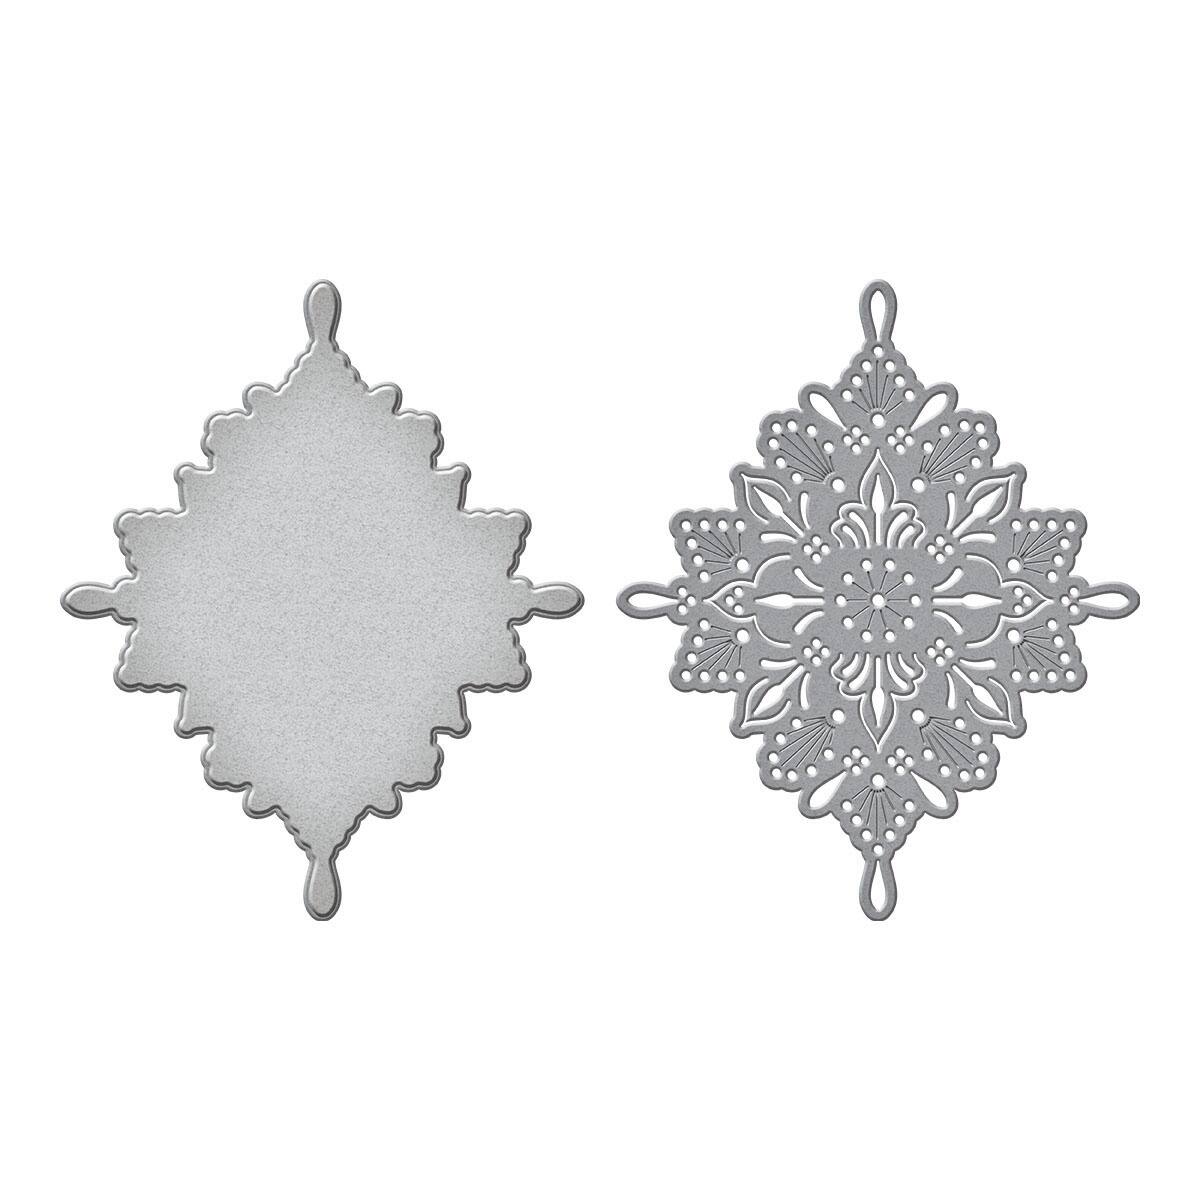 Spellbinders® Spring Into Stitching Stitched Medallion Etched Dies